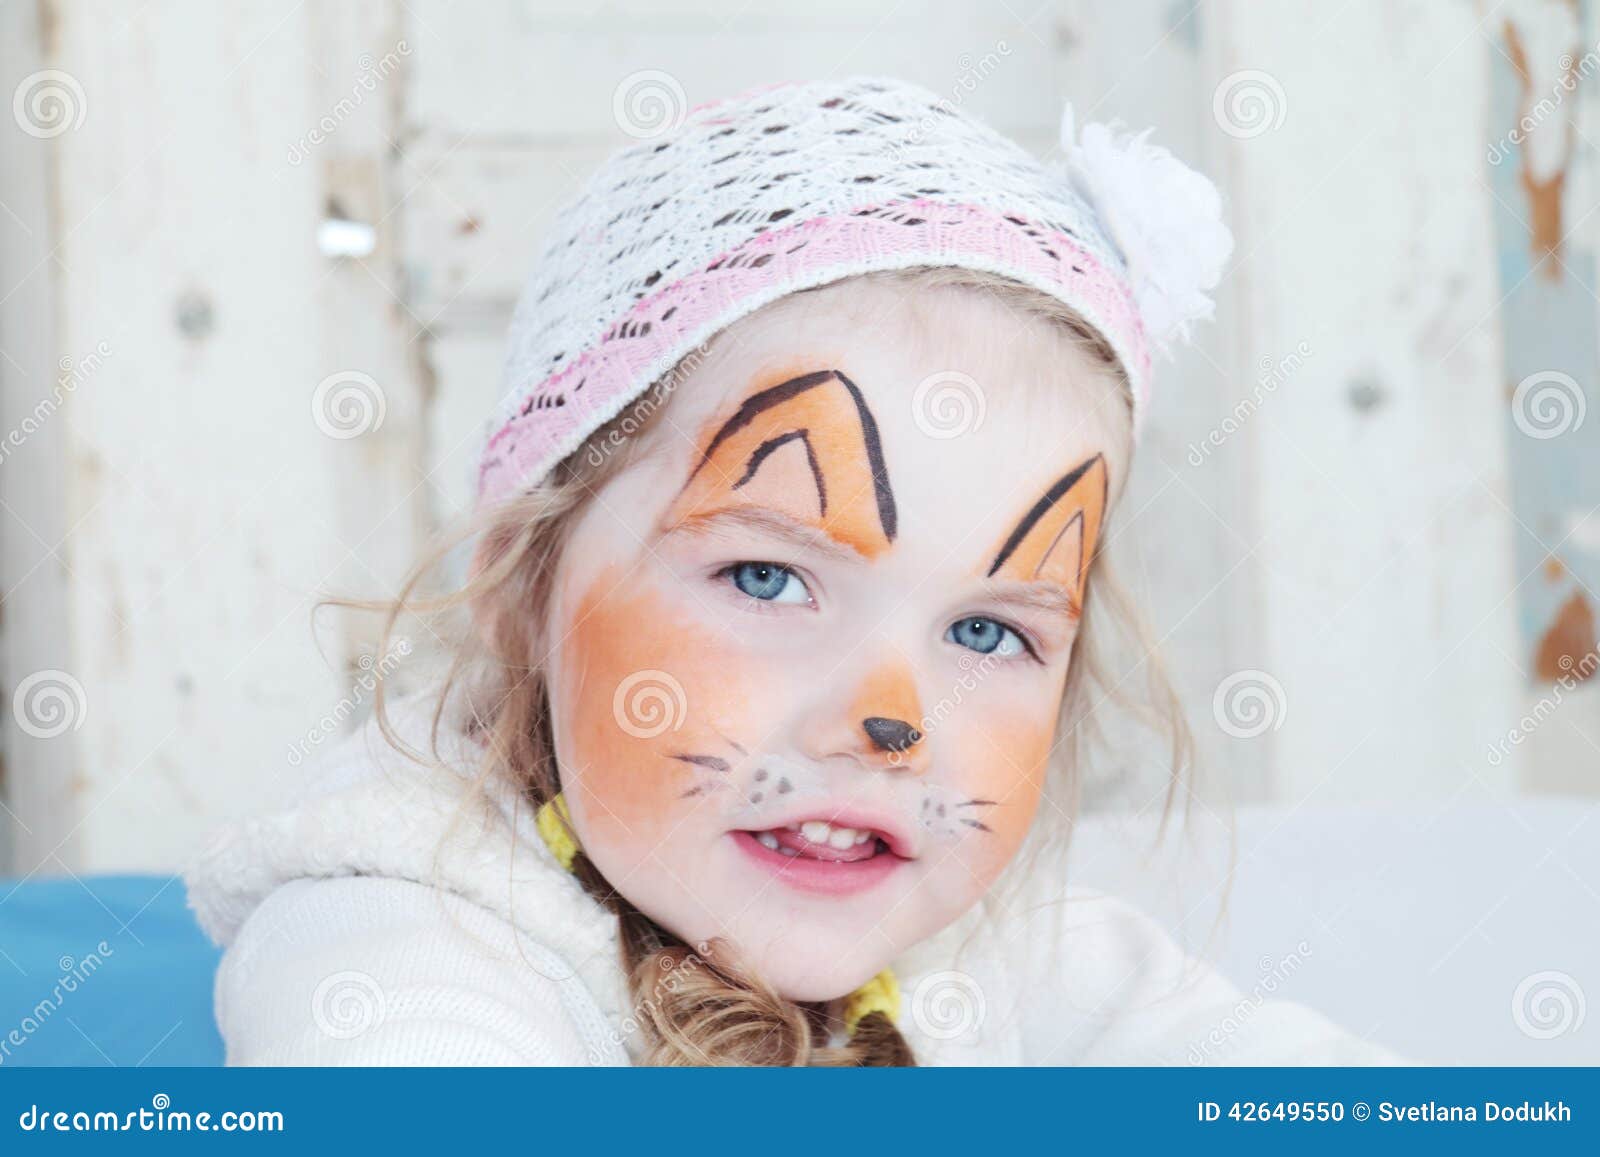 A Girl with Orange Face Paint · Free Stock Photo